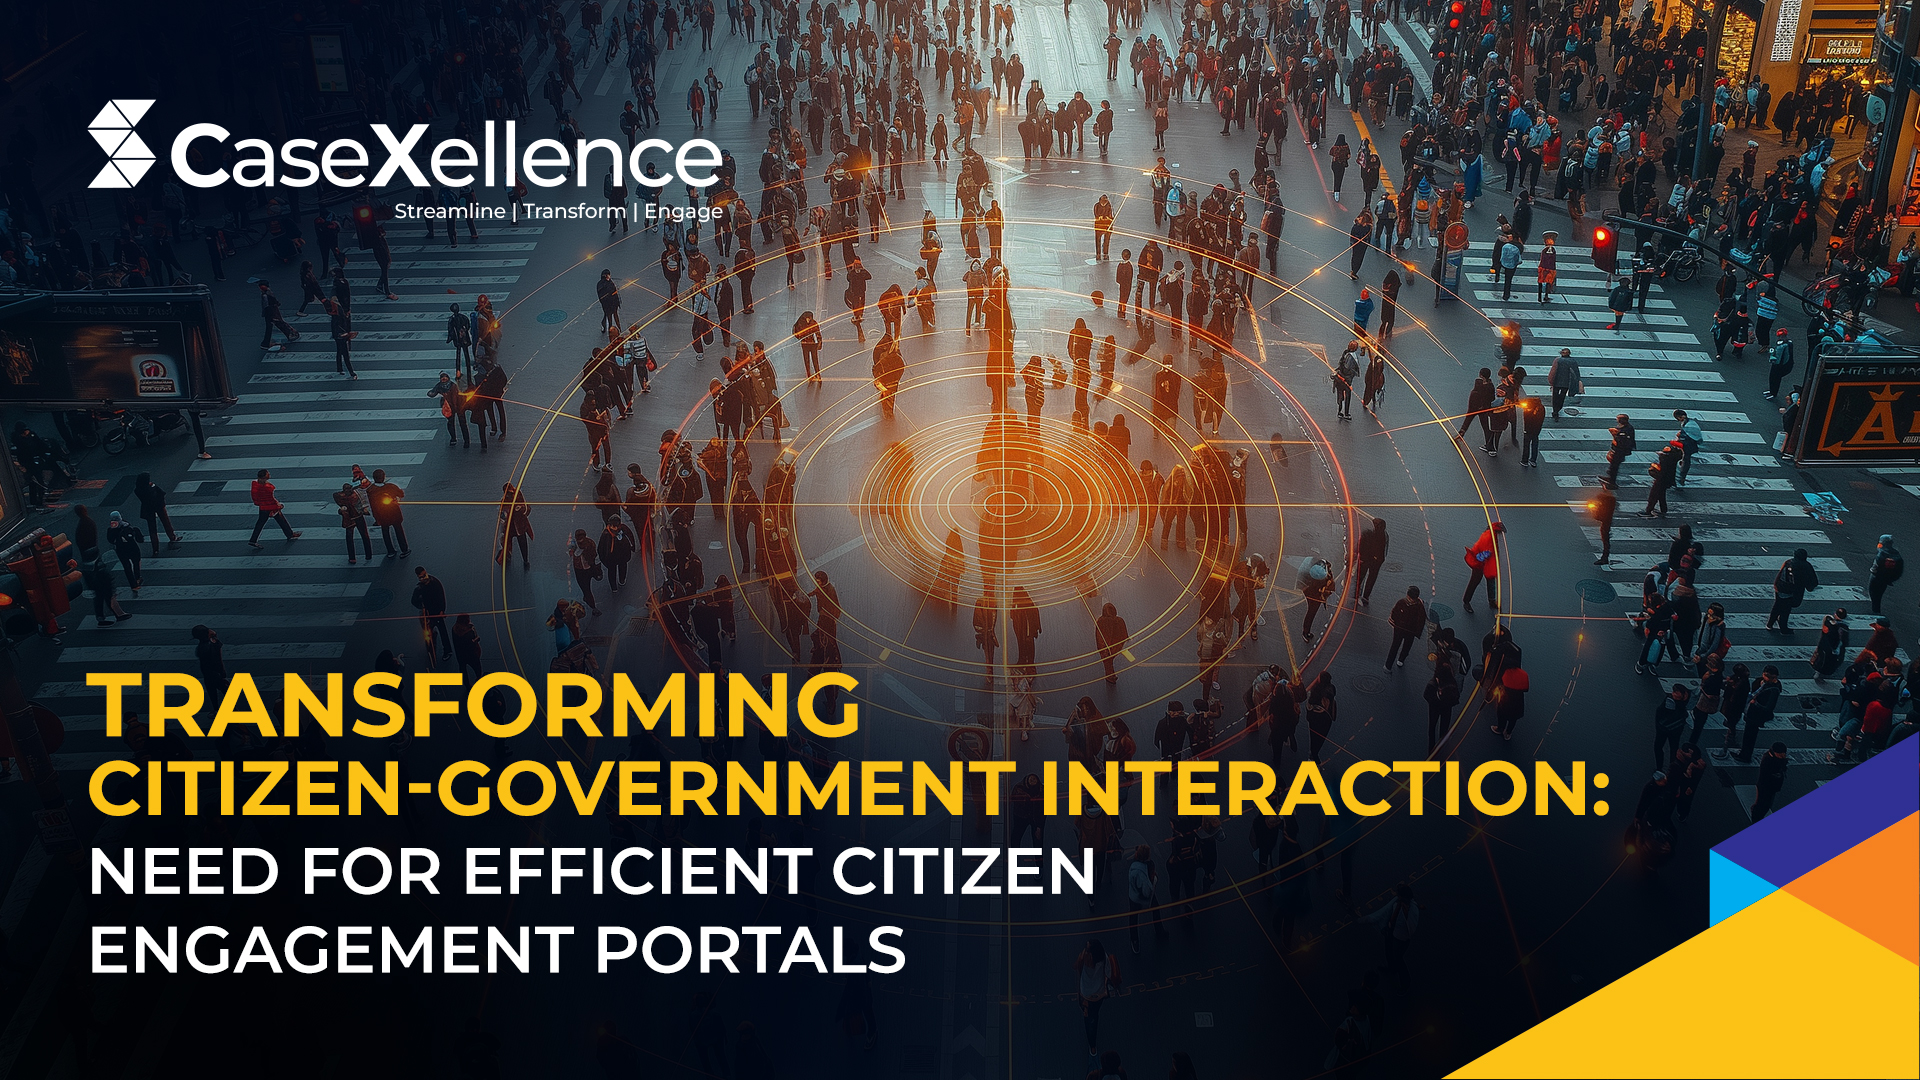 Transforming Citizen-Government Interaction: Need for Efficient Citizen Engagement Portals